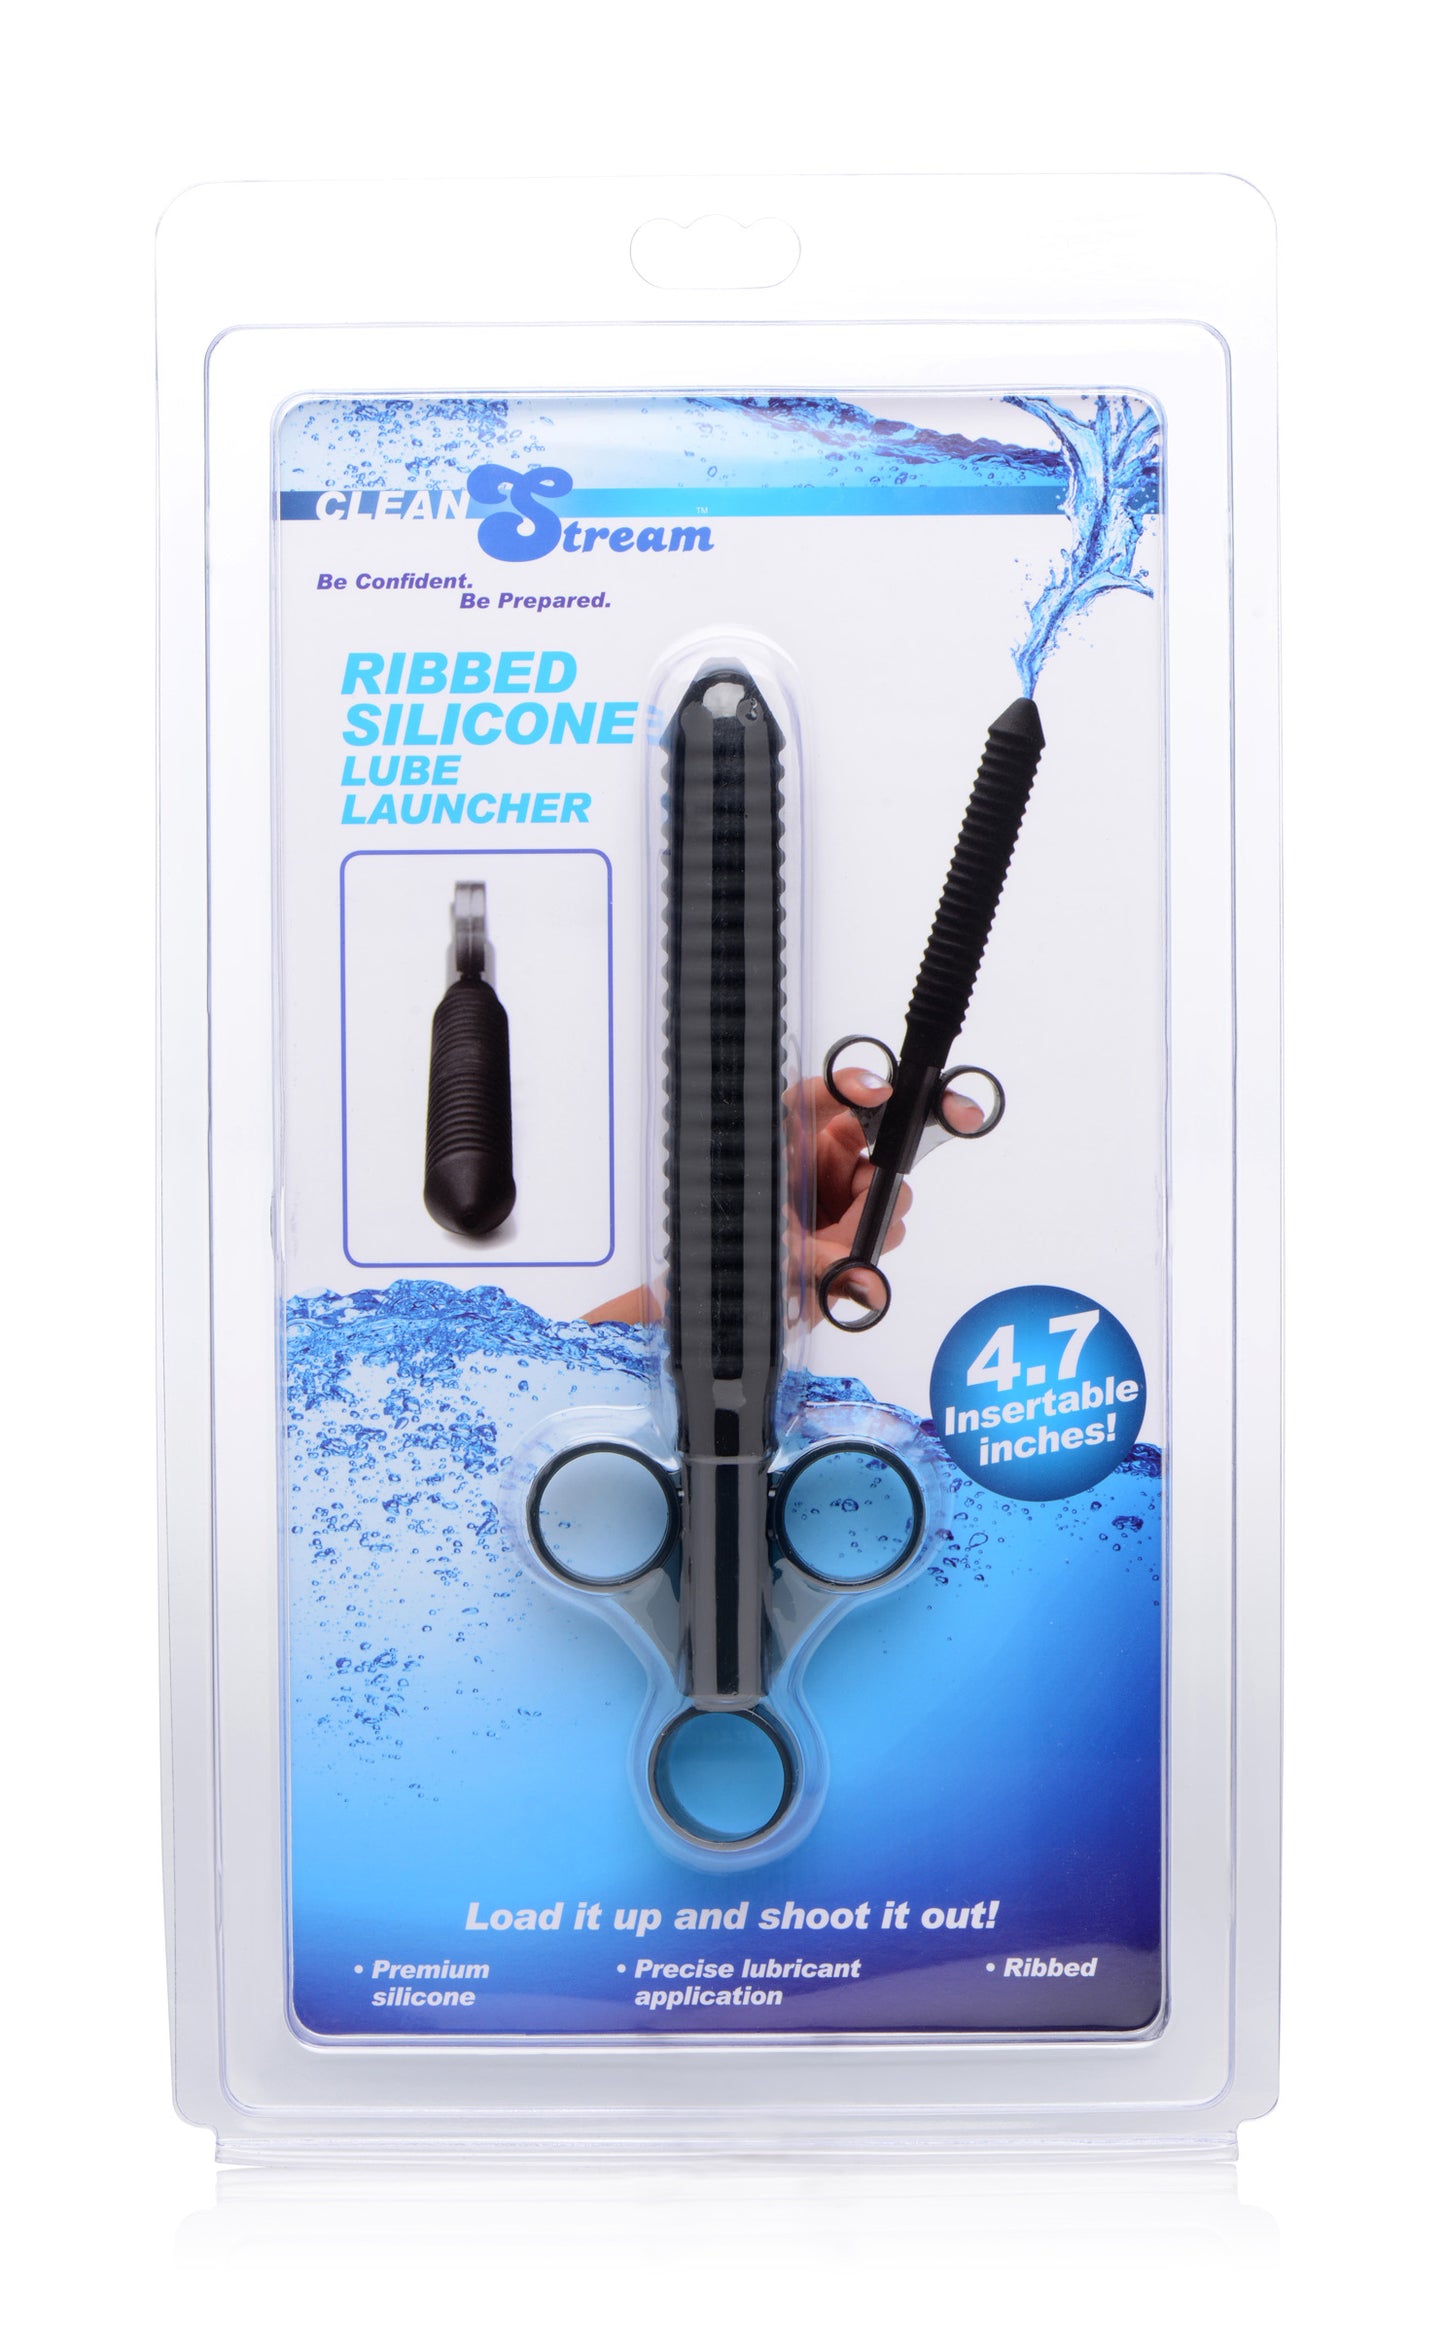 Ribbed Silicone Lubricant Launcher - UABDSM